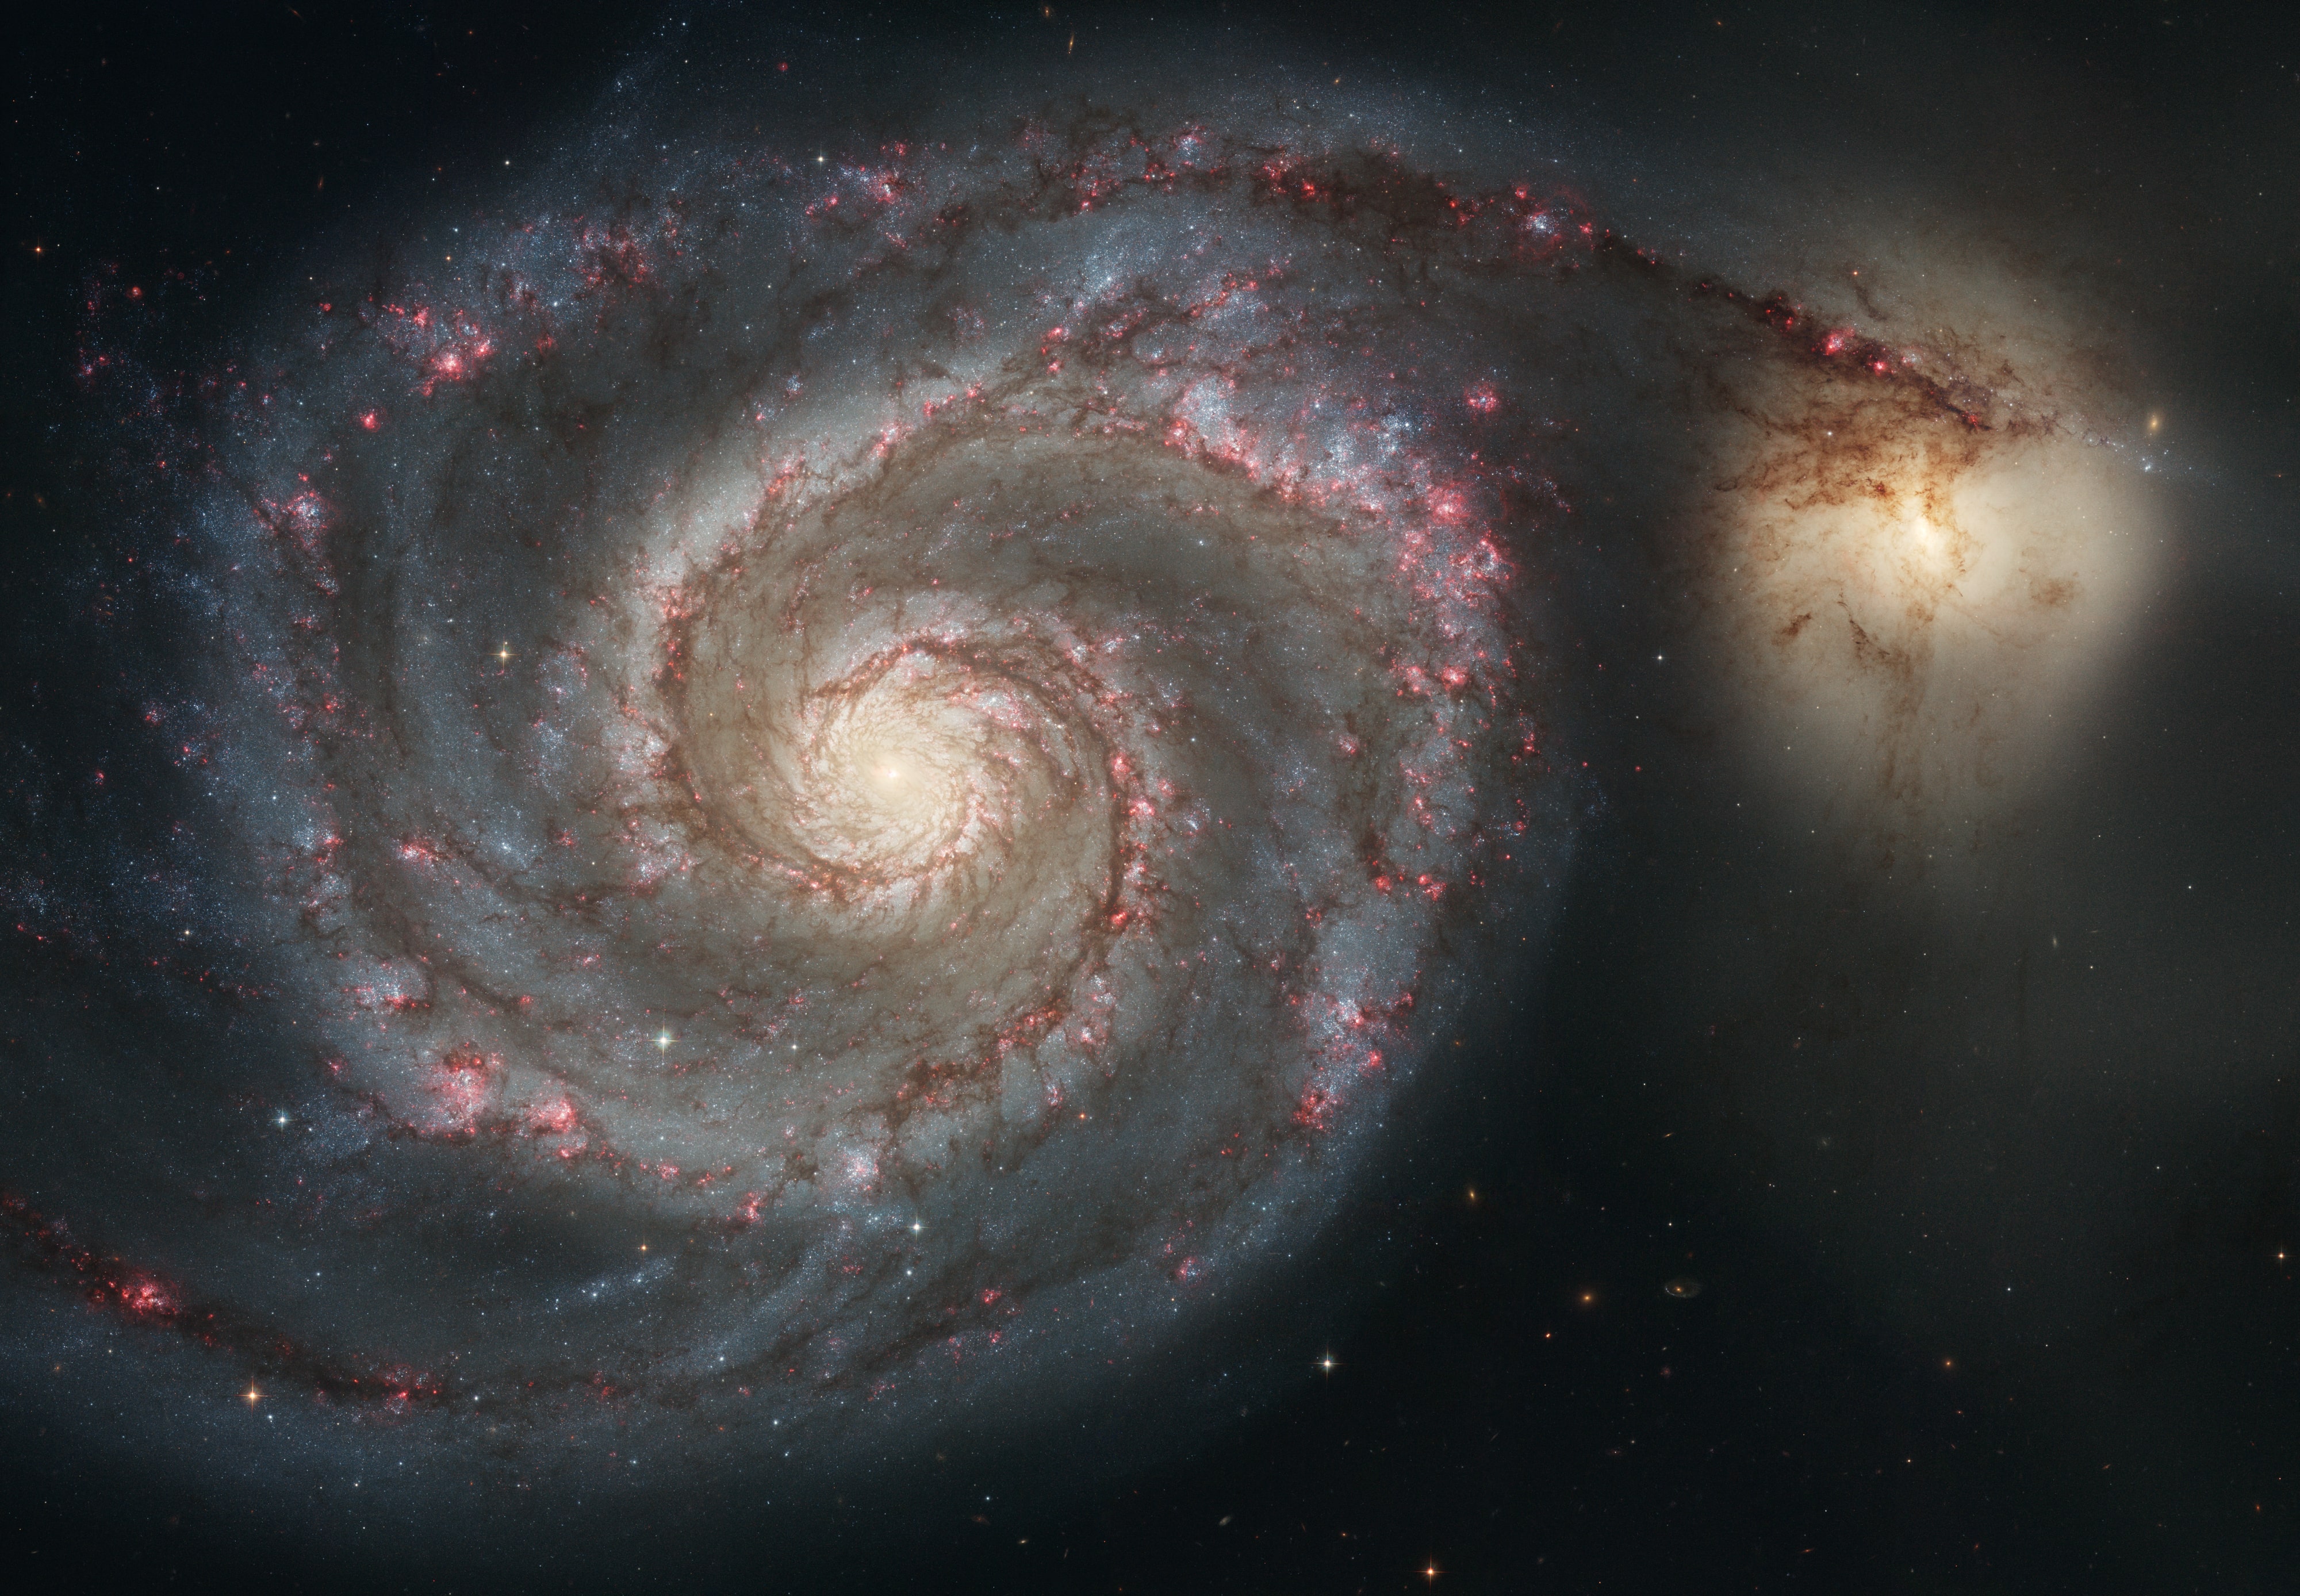 The Whirlpool Galaxy. Credit: NASA, ESA, S.Beckwith (STScl), and the Hubble Heritage Team (STScl/AURA)